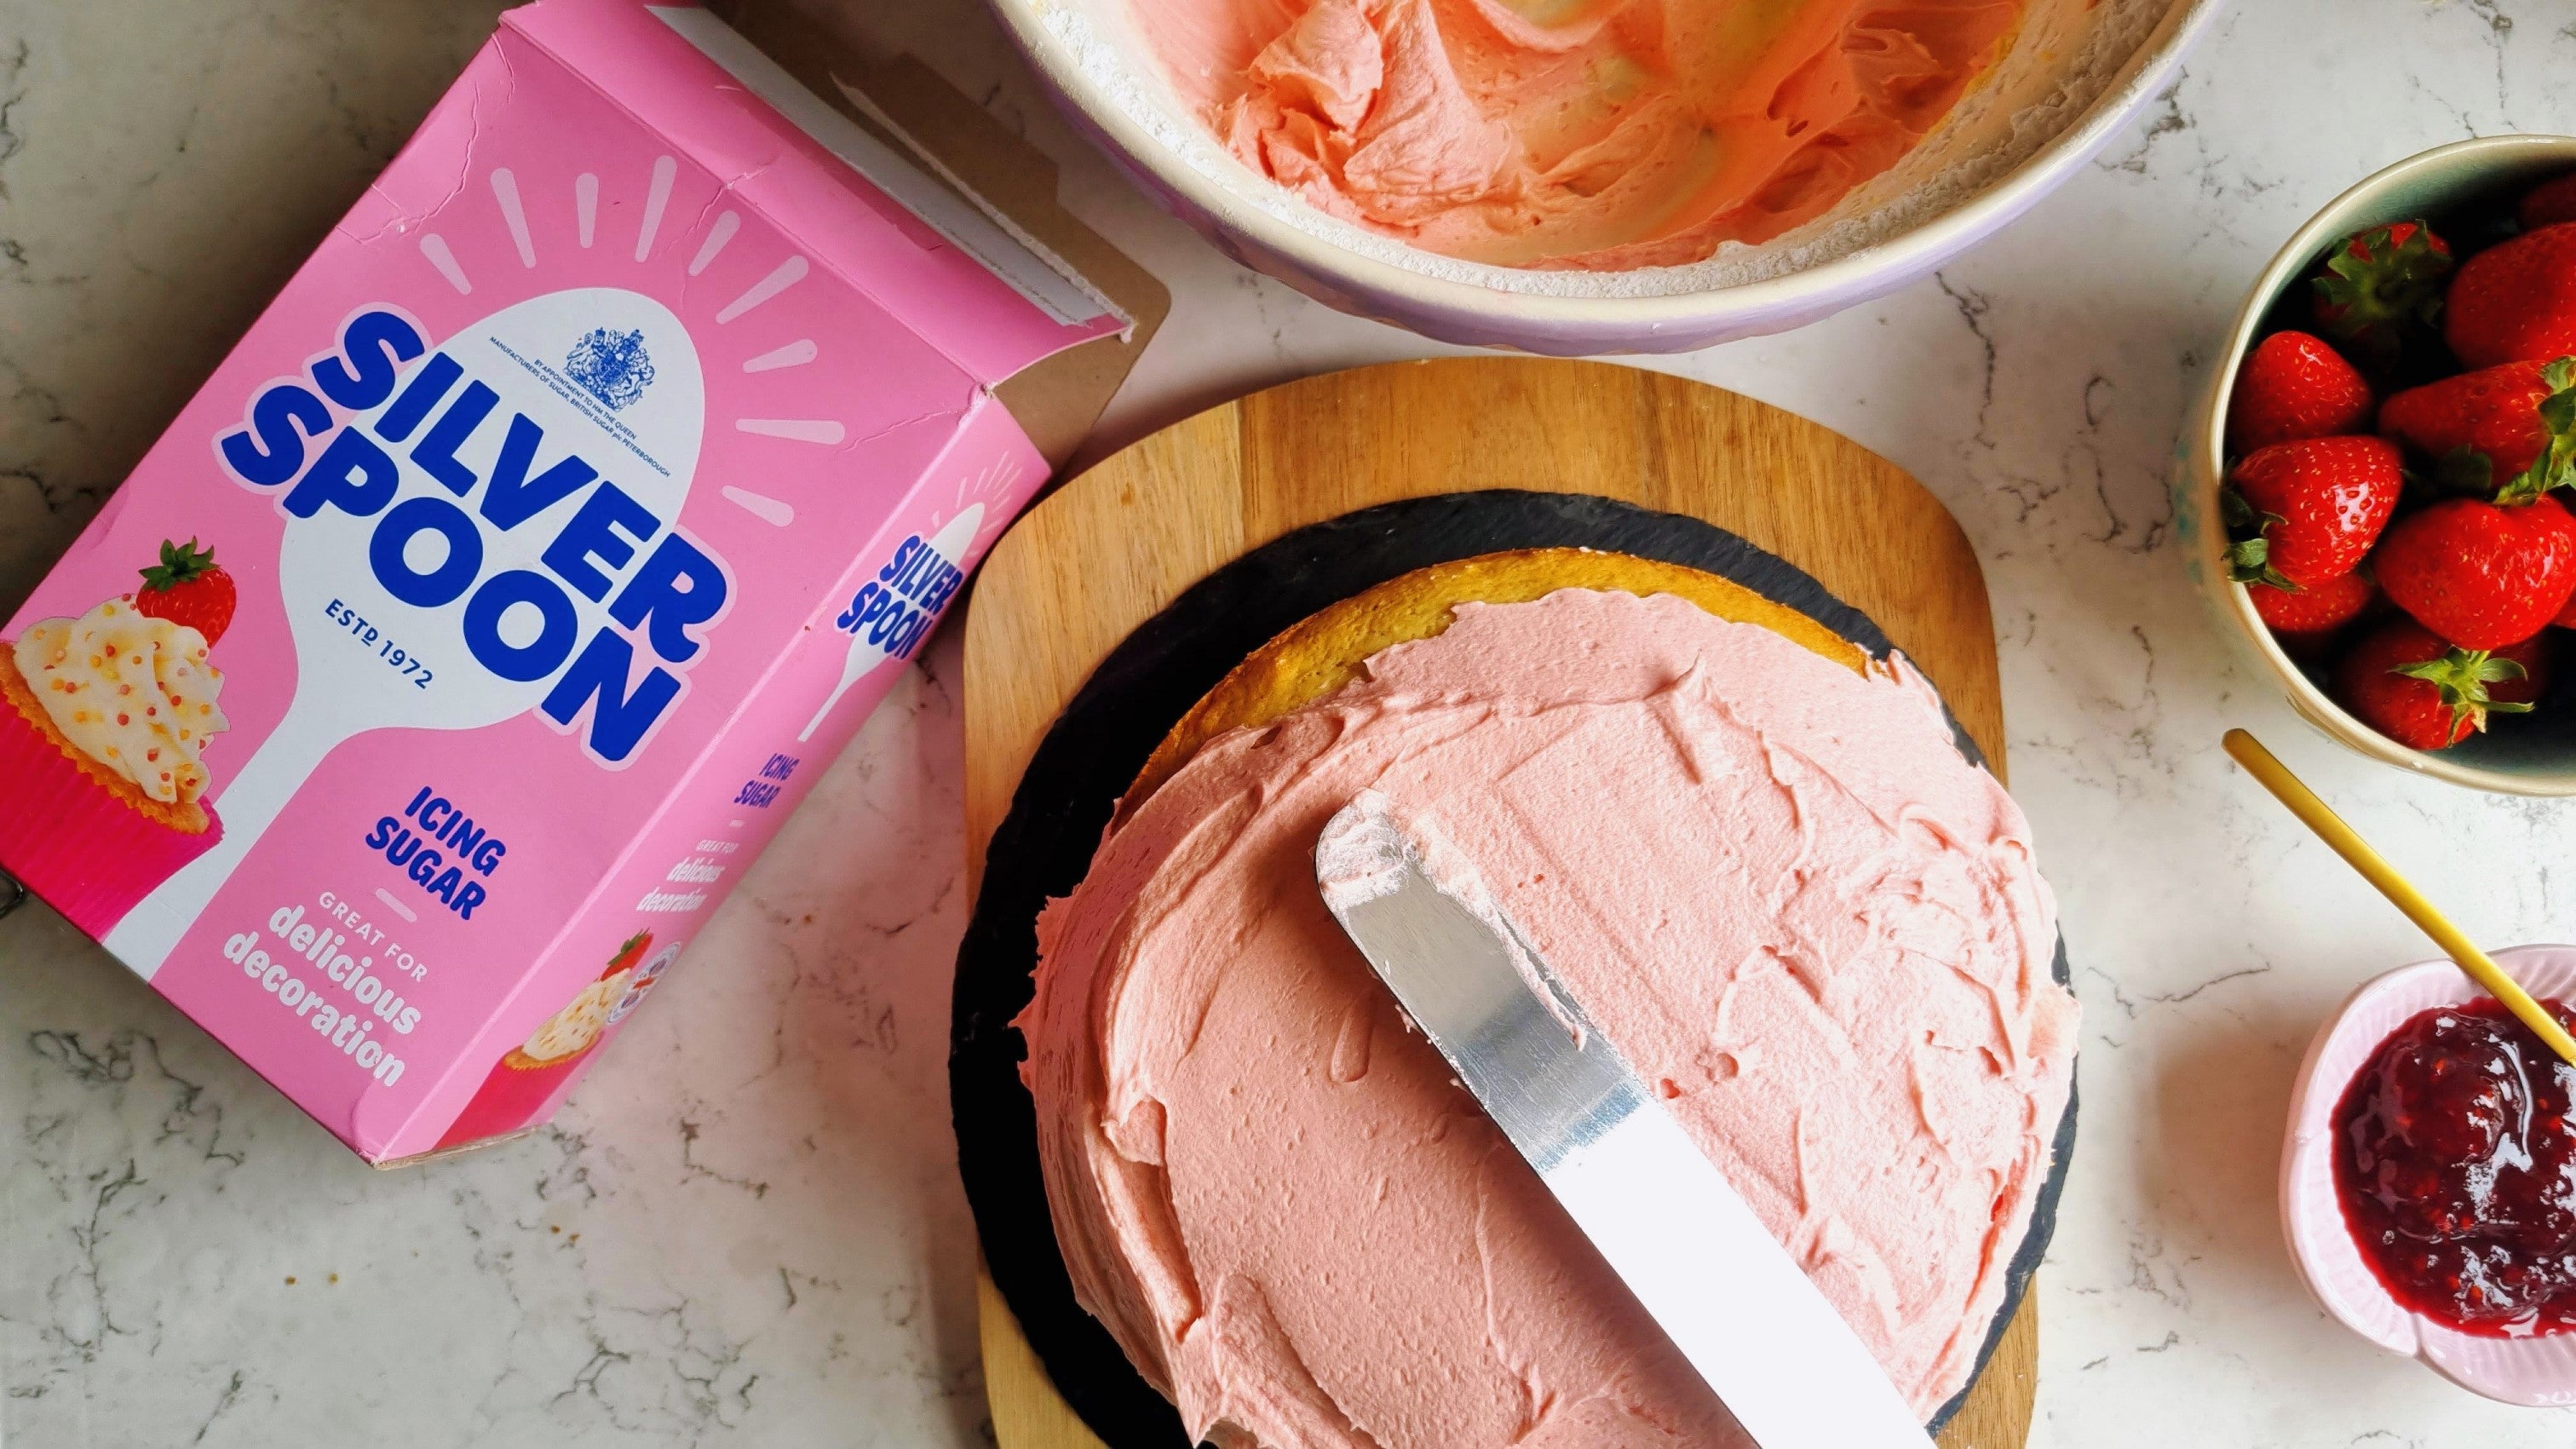 Spreading pink strawberry-flavoured buttercream over a homemade sponge cake